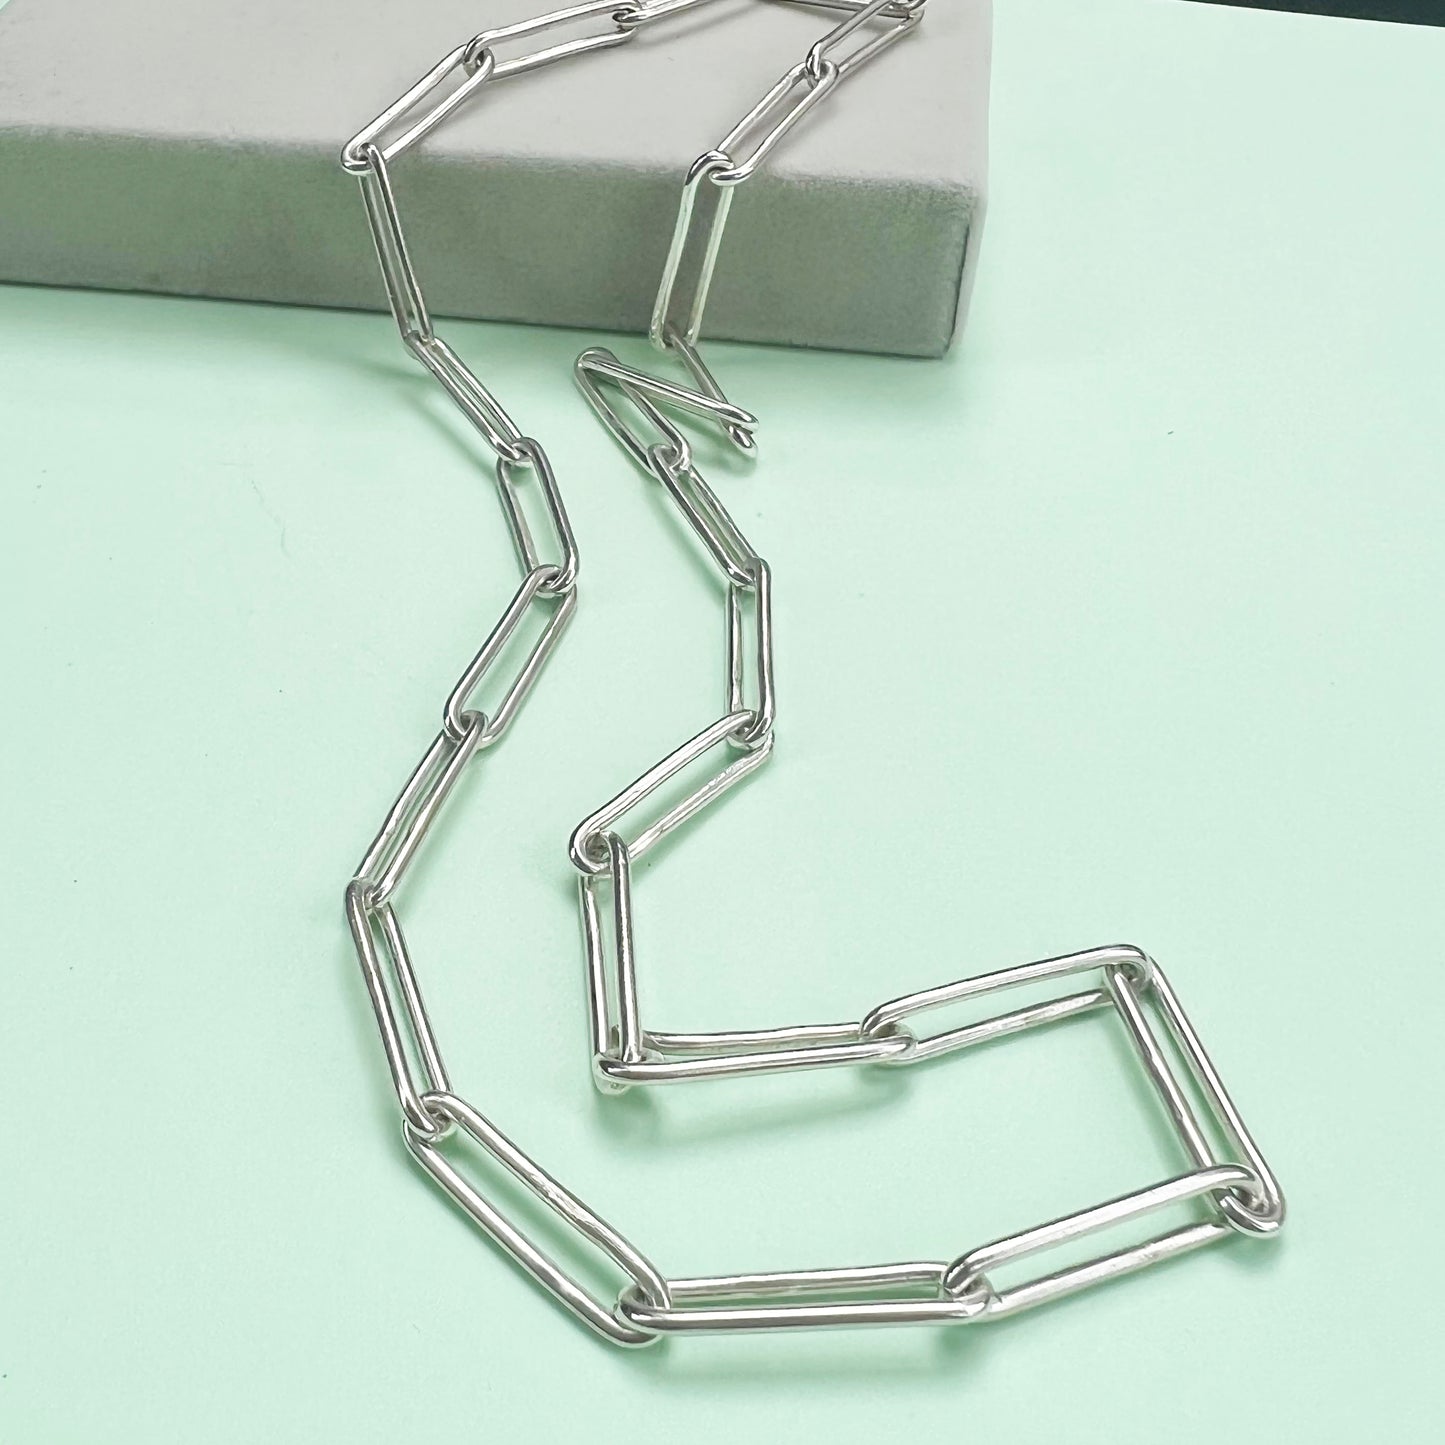 Chunky polished paperclip chain, Paperclip chain, LFW, London fashion week, London fashion week jewellery, polished silver paperclip chain, recycled silver, recycled silver paperclip chain, polished 20 inch paperclip chain